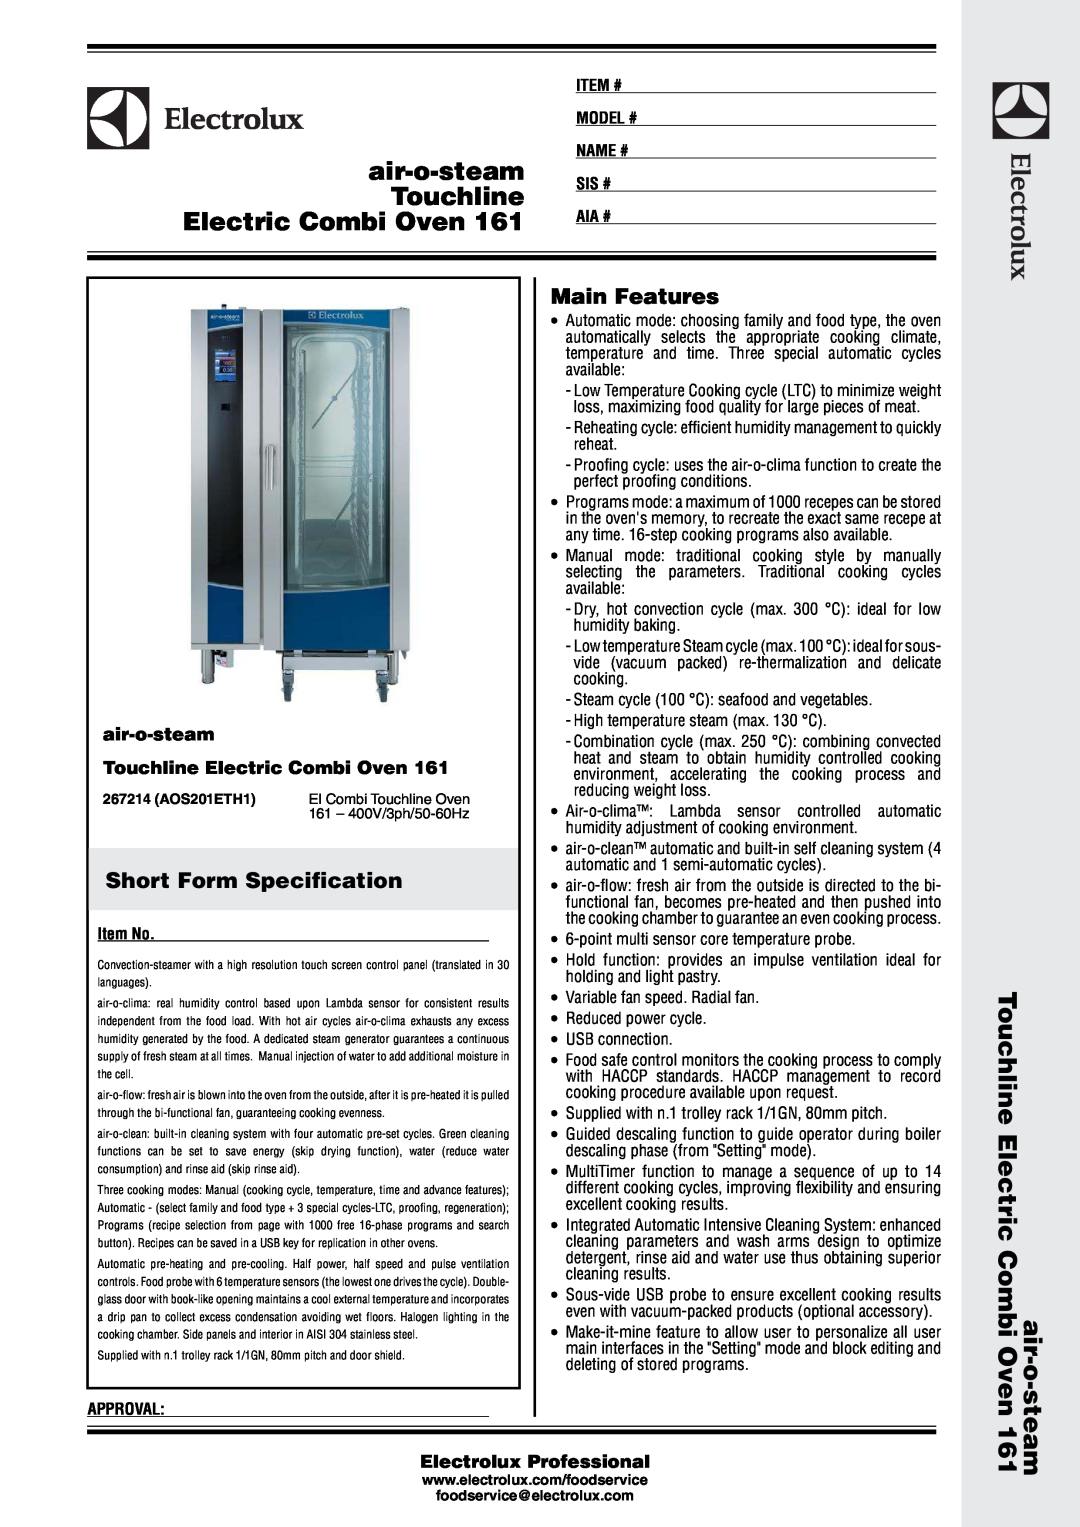 Electrolux 161 manual air-o-steam Touchline Electric Combi Oven, Main Features, Short Form Specification 